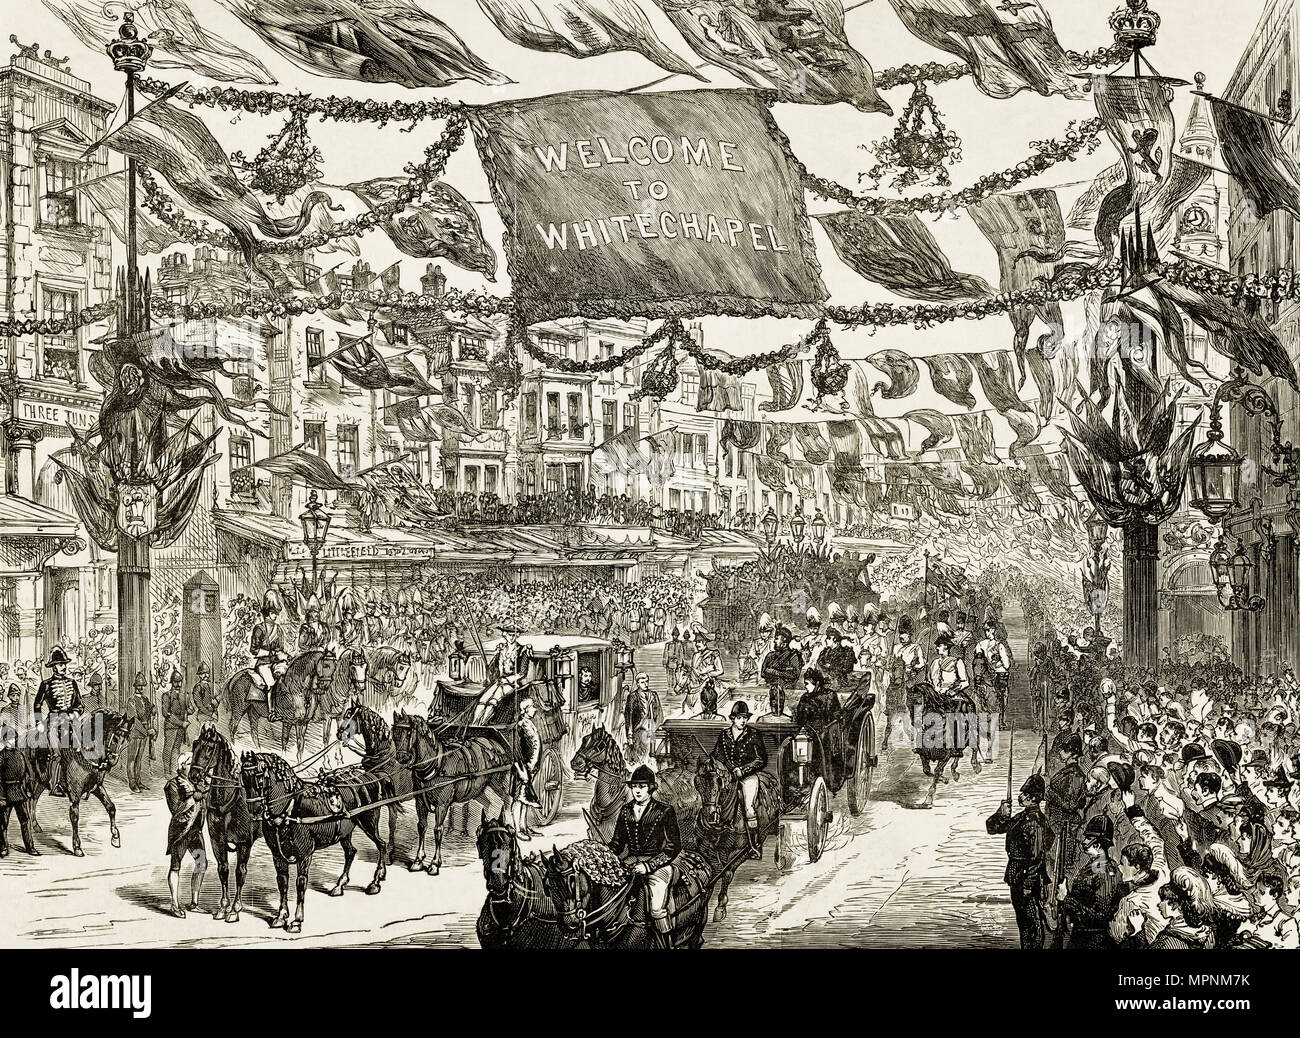 Queen Victoria royal procession in High Street Aldgate passing the city boundary Whitechapel East London England UK 14th May 1887 with bunting & crowds cheering. 19th century Victorian engraving circa 1887 Stock Photo